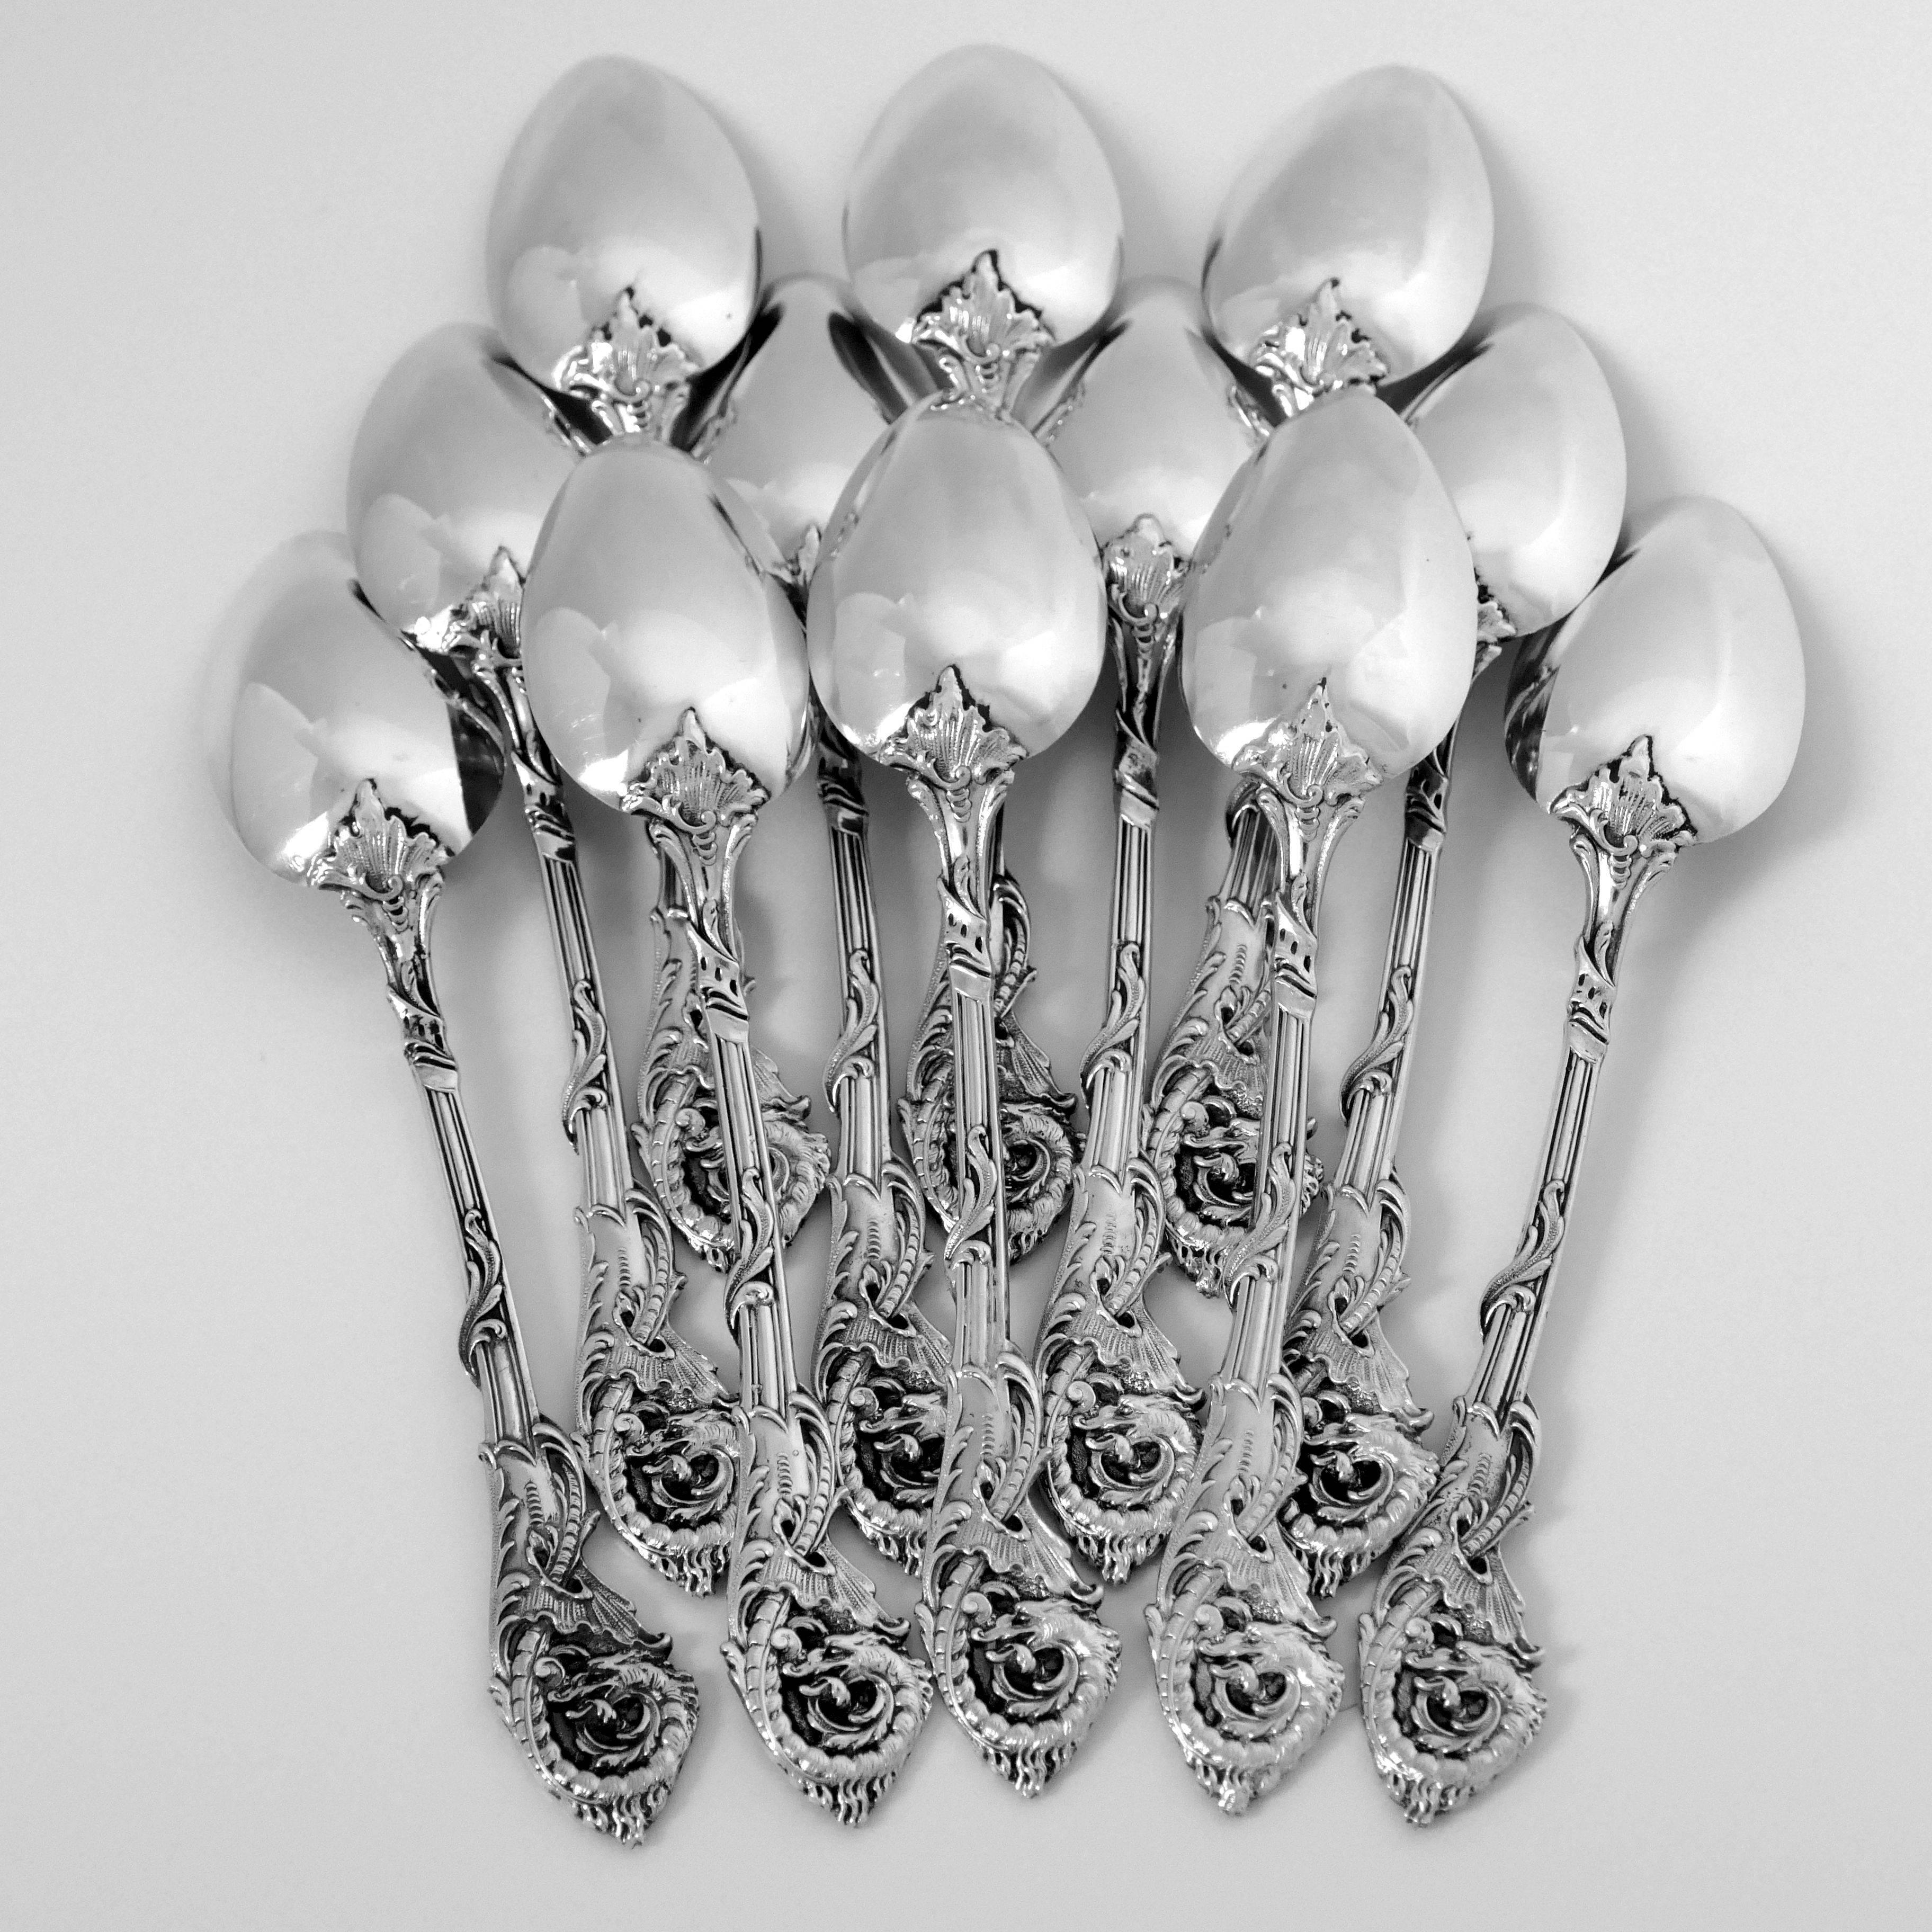 Late 19th Century Veyrat Rare French Sterling Silver 18k Gold Tea Coffee Spoons Set 12 Pc, Dragon For Sale